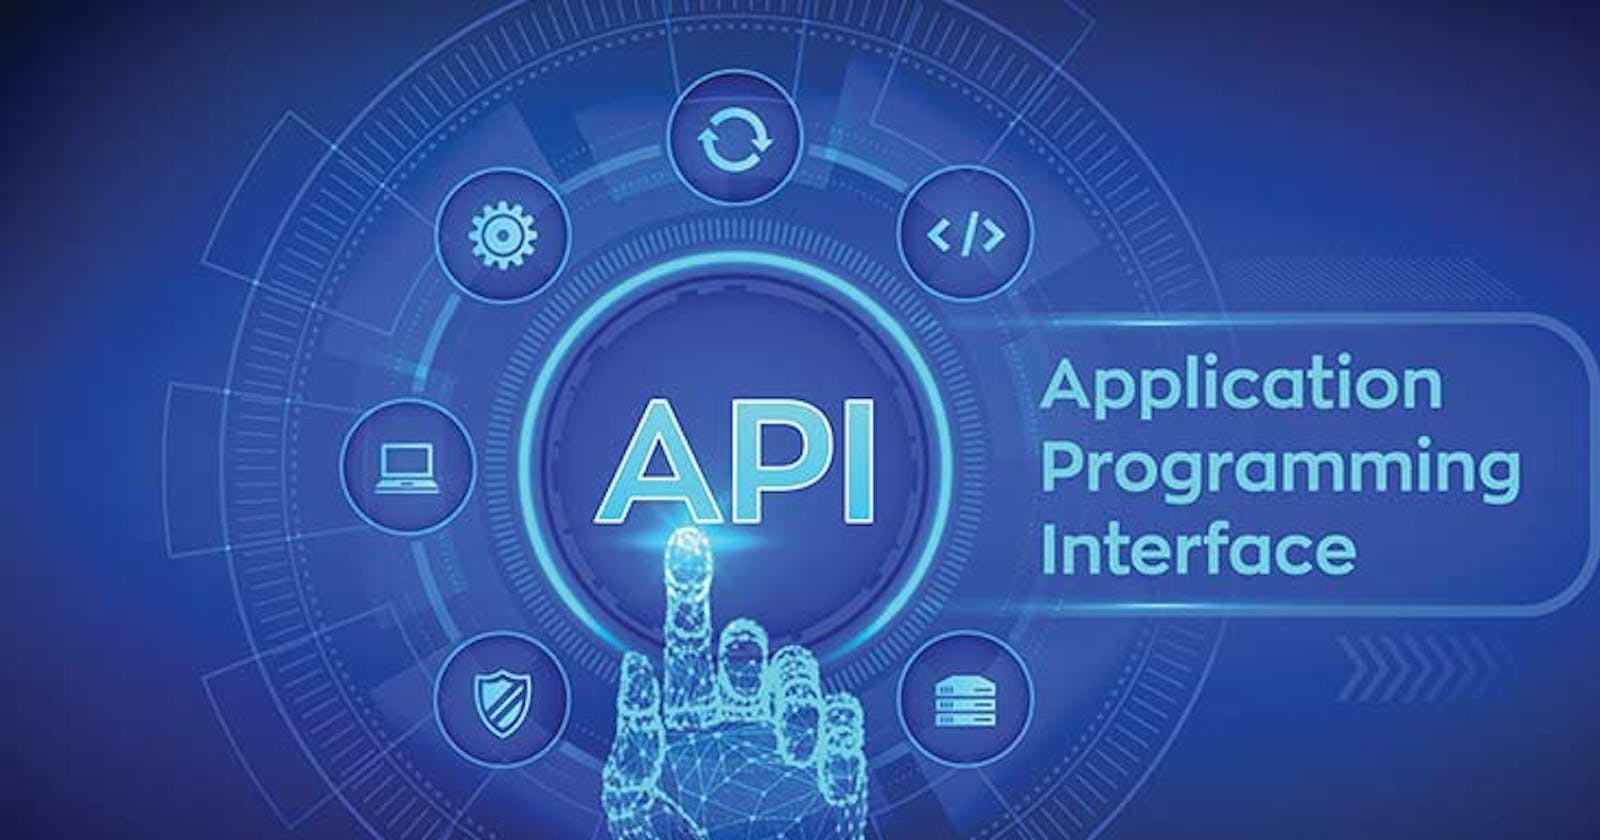 10 Fun APIs to Use For Your Next Project